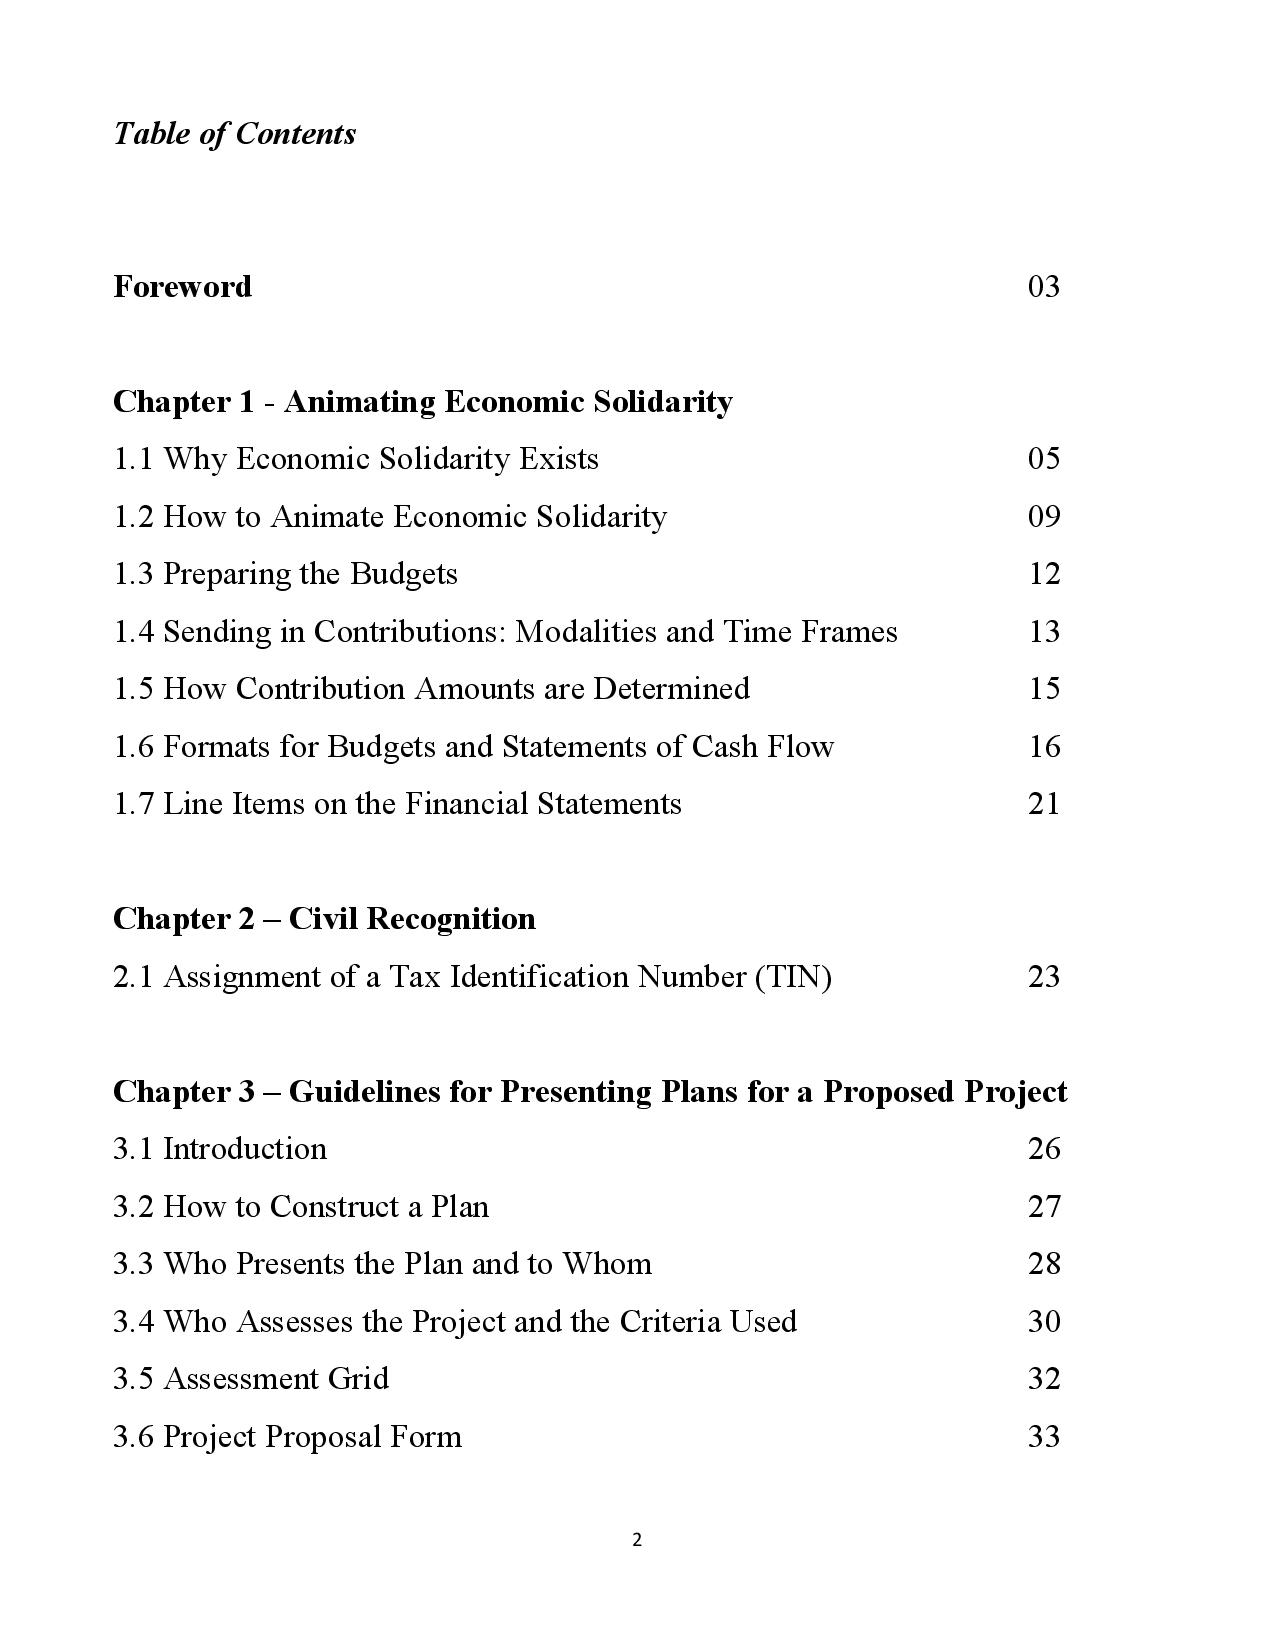 ASE-ASC Economic solidarity 2018-page-002.jpg